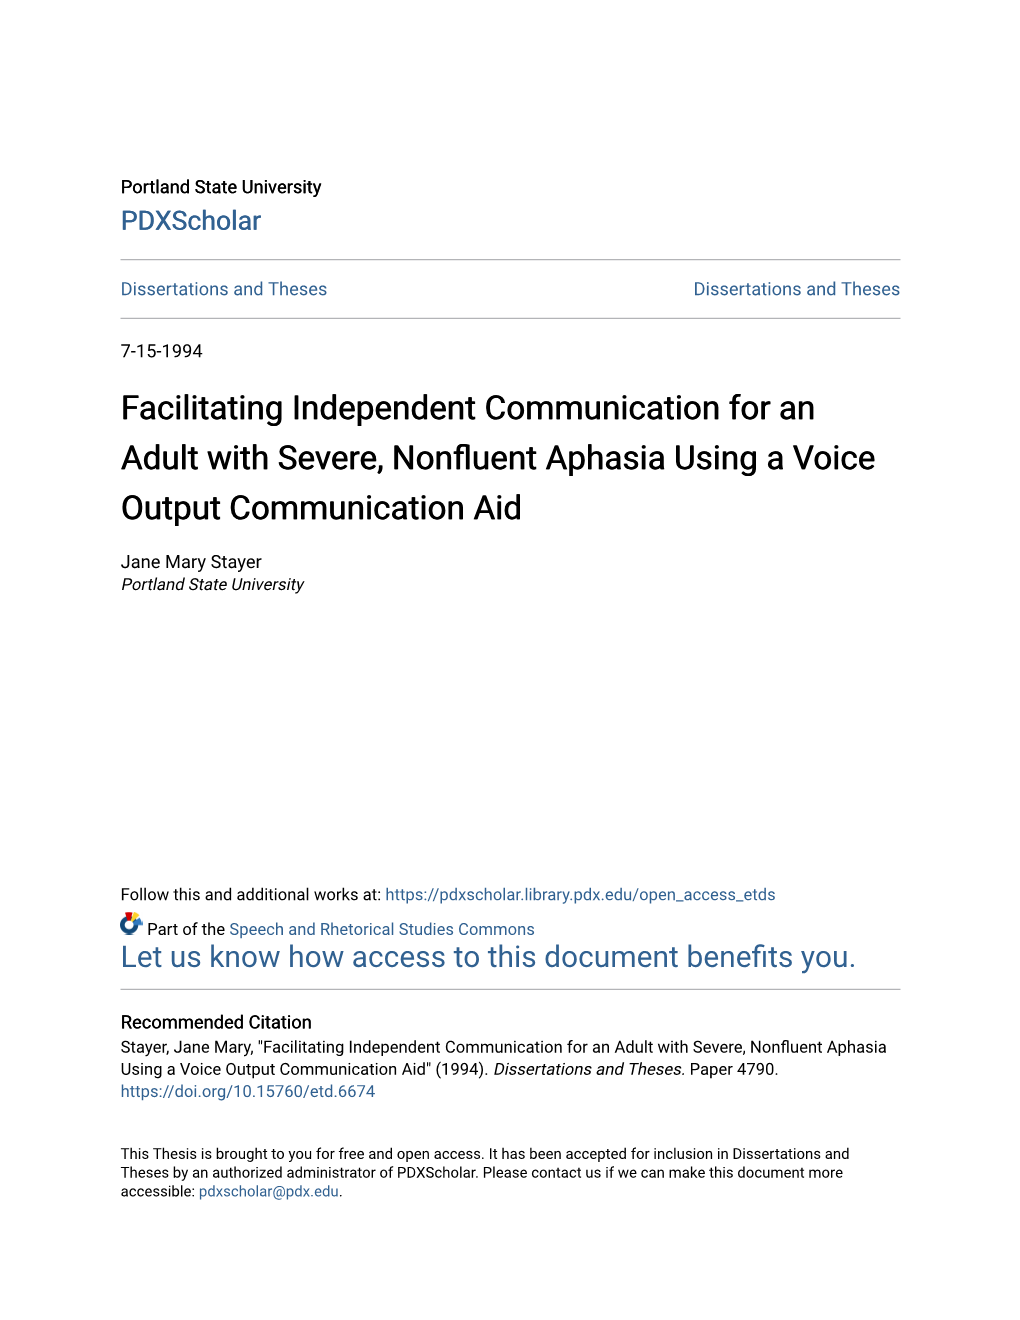 Facilitating Independent Communication for an Adult with Severe, Nonfluent Aphasia Using a Voice Output Communication Aid" (1994)